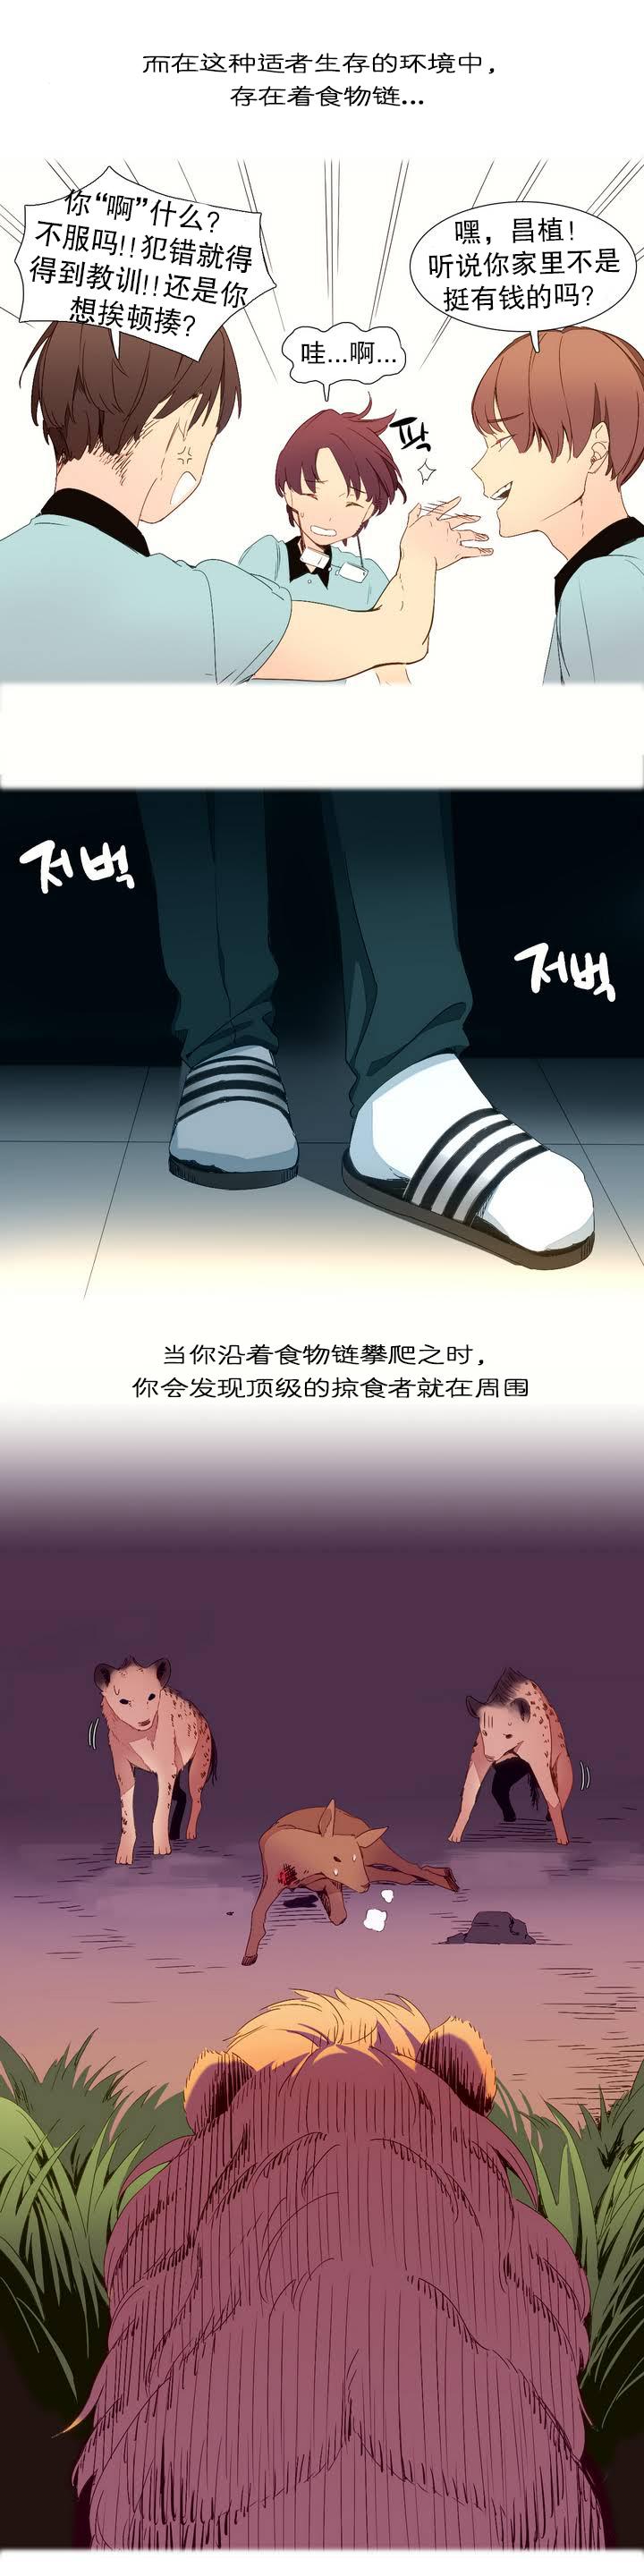 Sexteen [Rozer] 一个由我统治的世界(A World that I Rule) Ch.1-5 [Chinese] Korean - Page 9